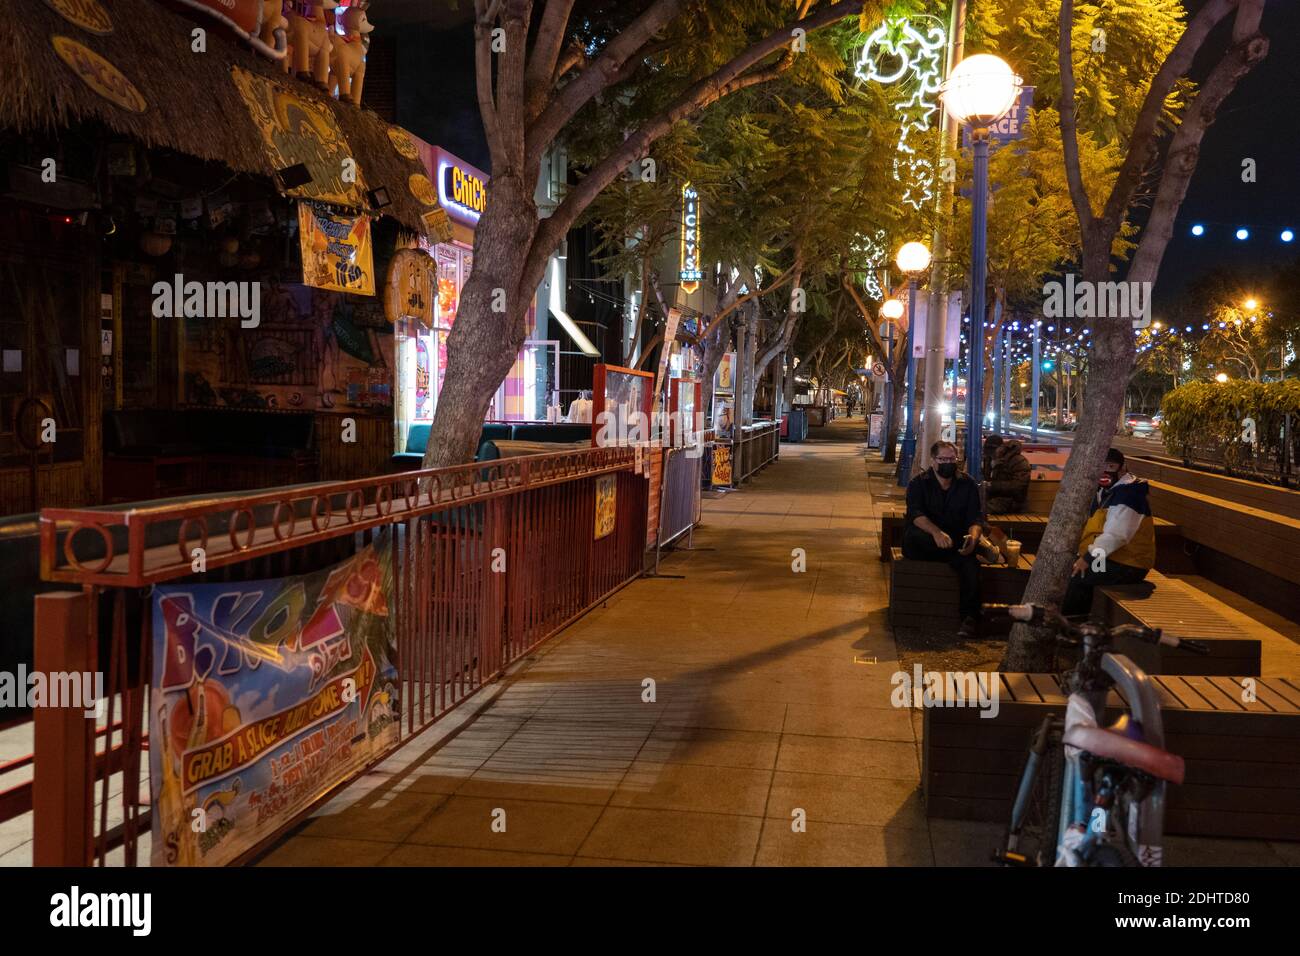 West Hollywood, CA USA - Dec 7 2020: Deserted sidewalk cafes  after LA ordered outdoor dining closed due to new Covid-19 restrictions Stock Photo